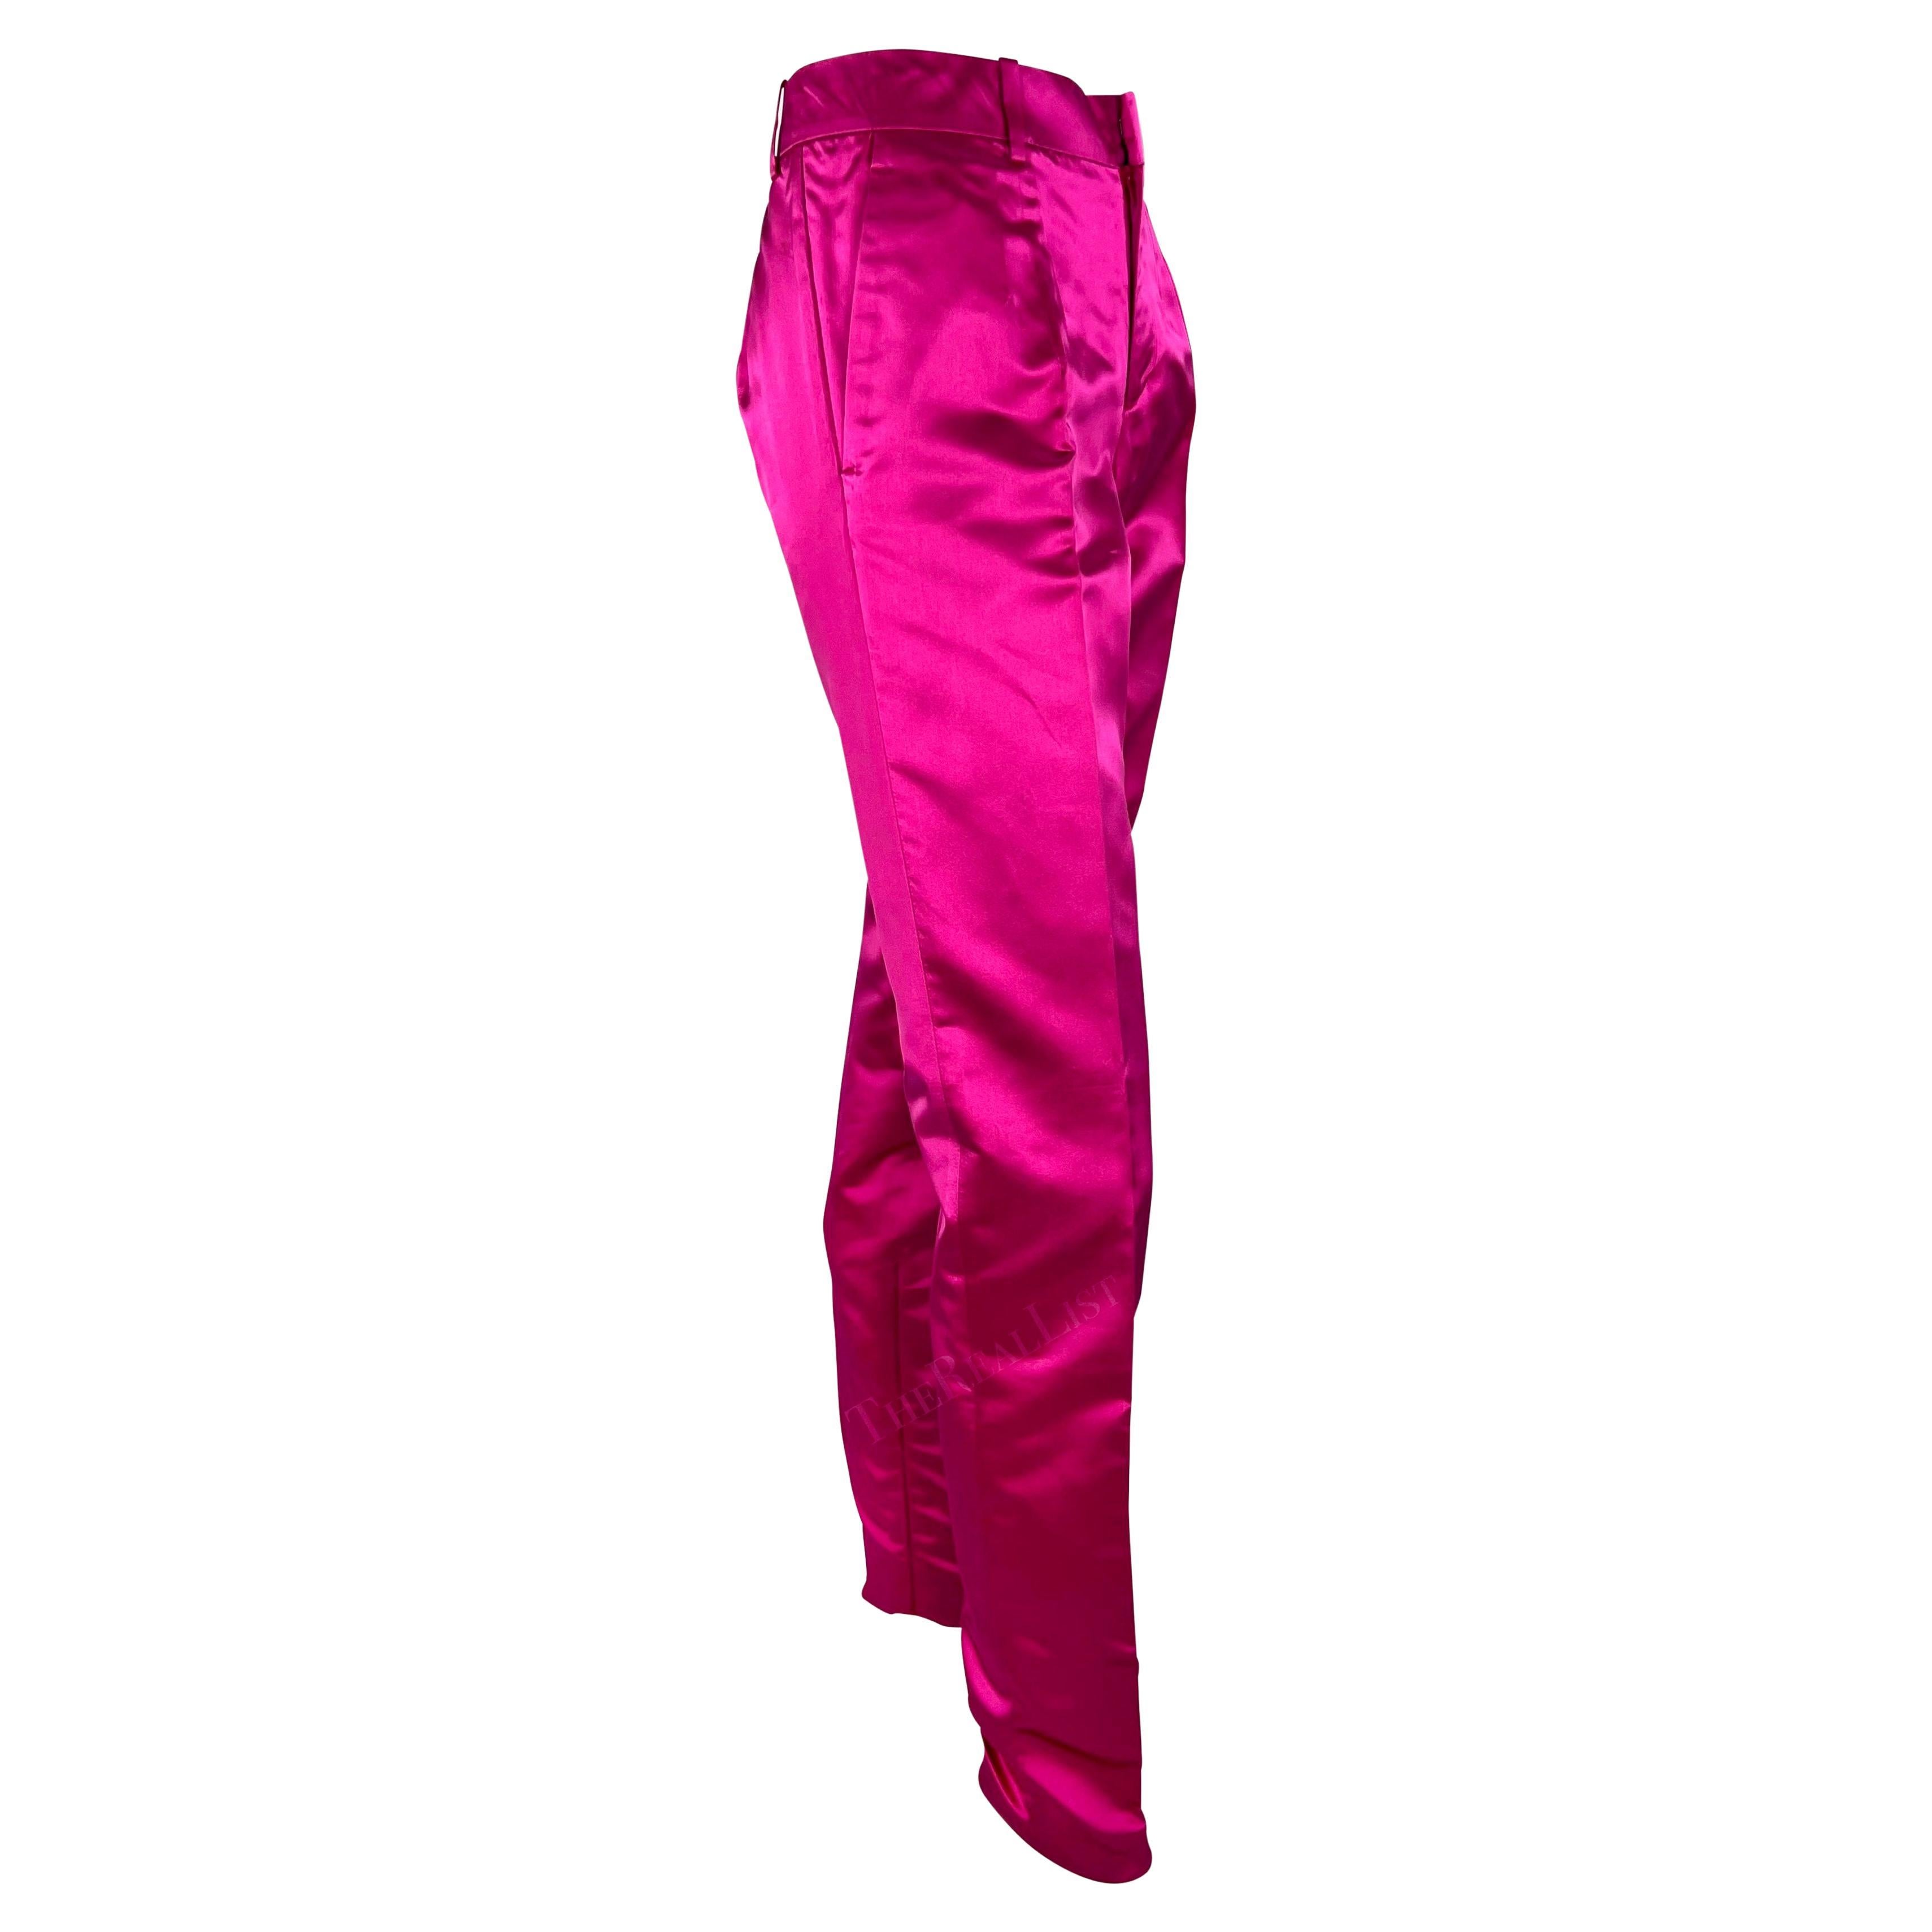 S/S 2001 Gucci by Tom Ford Runway Hot Pink Satin Silk Blend Tapered Pants For Sale 4